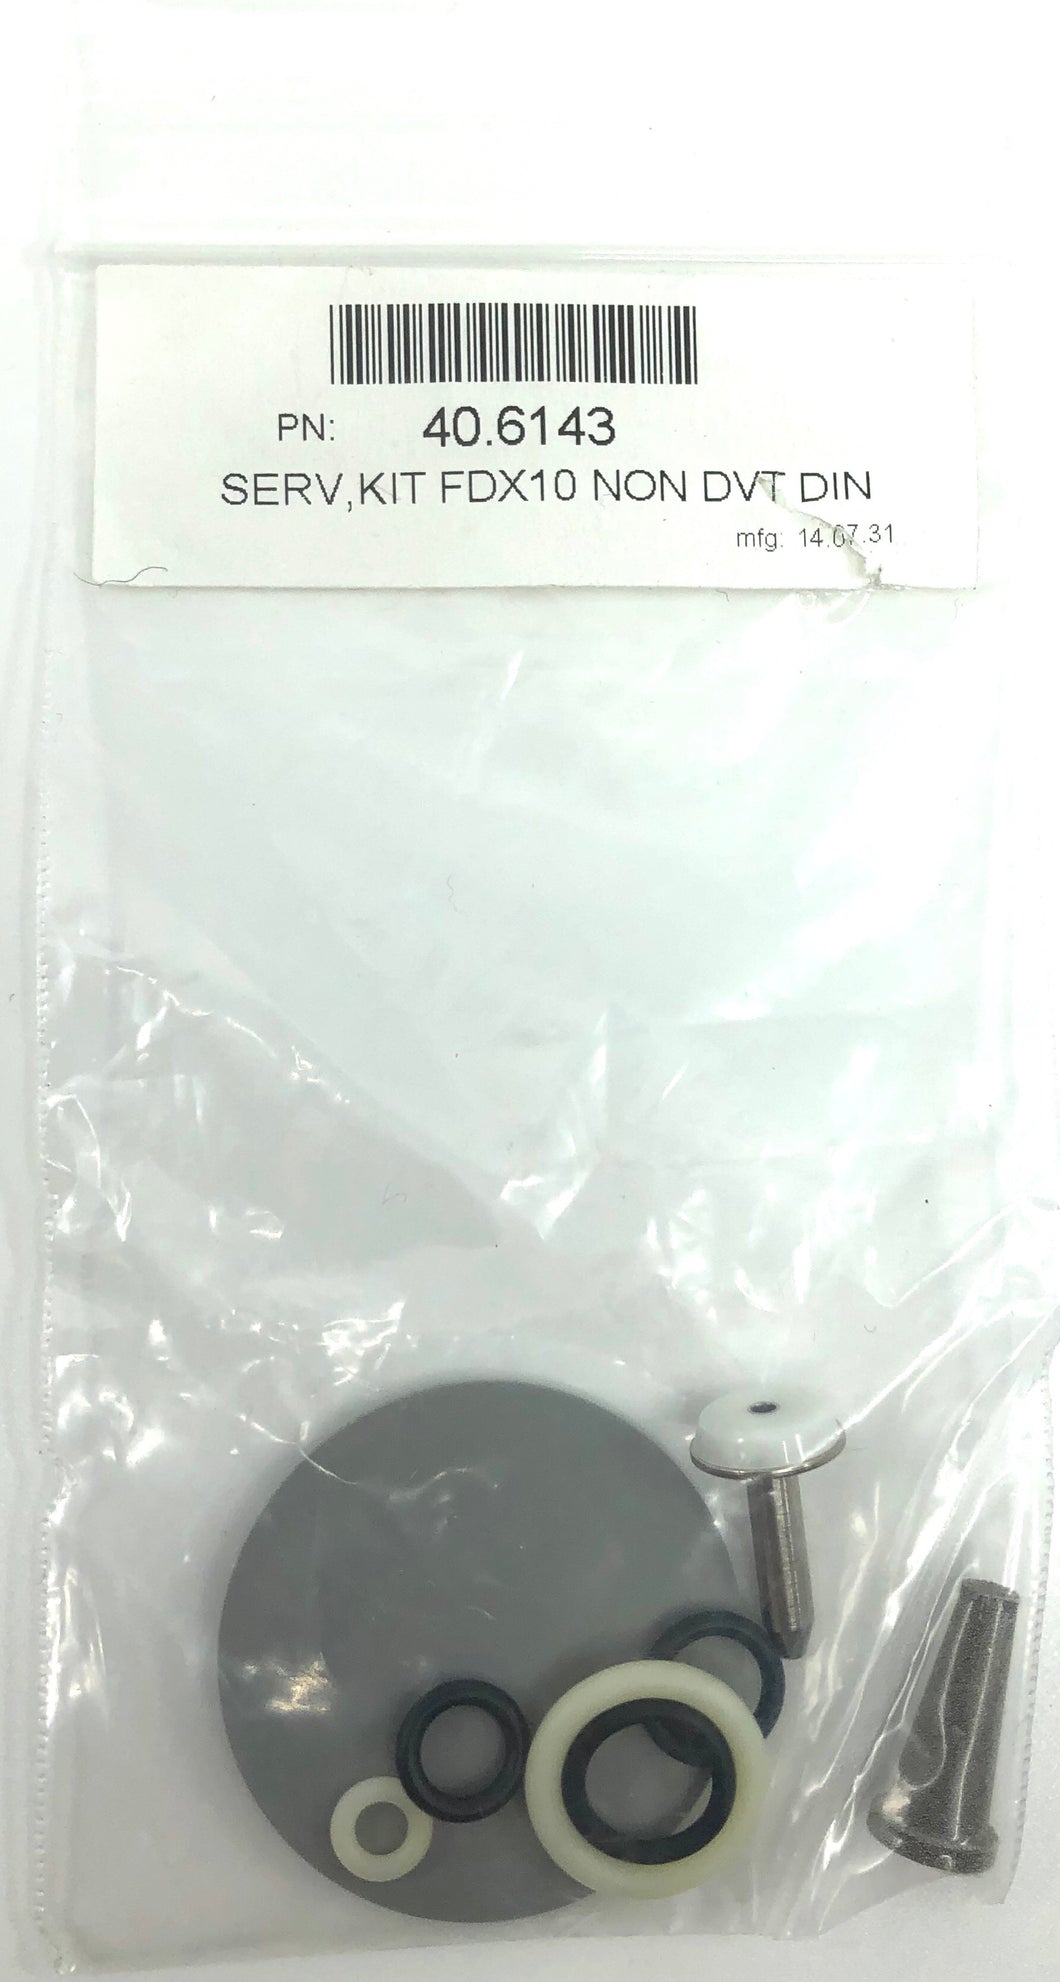 Oceanic FDX10 non DVT First Stage Service Kit 40.6143